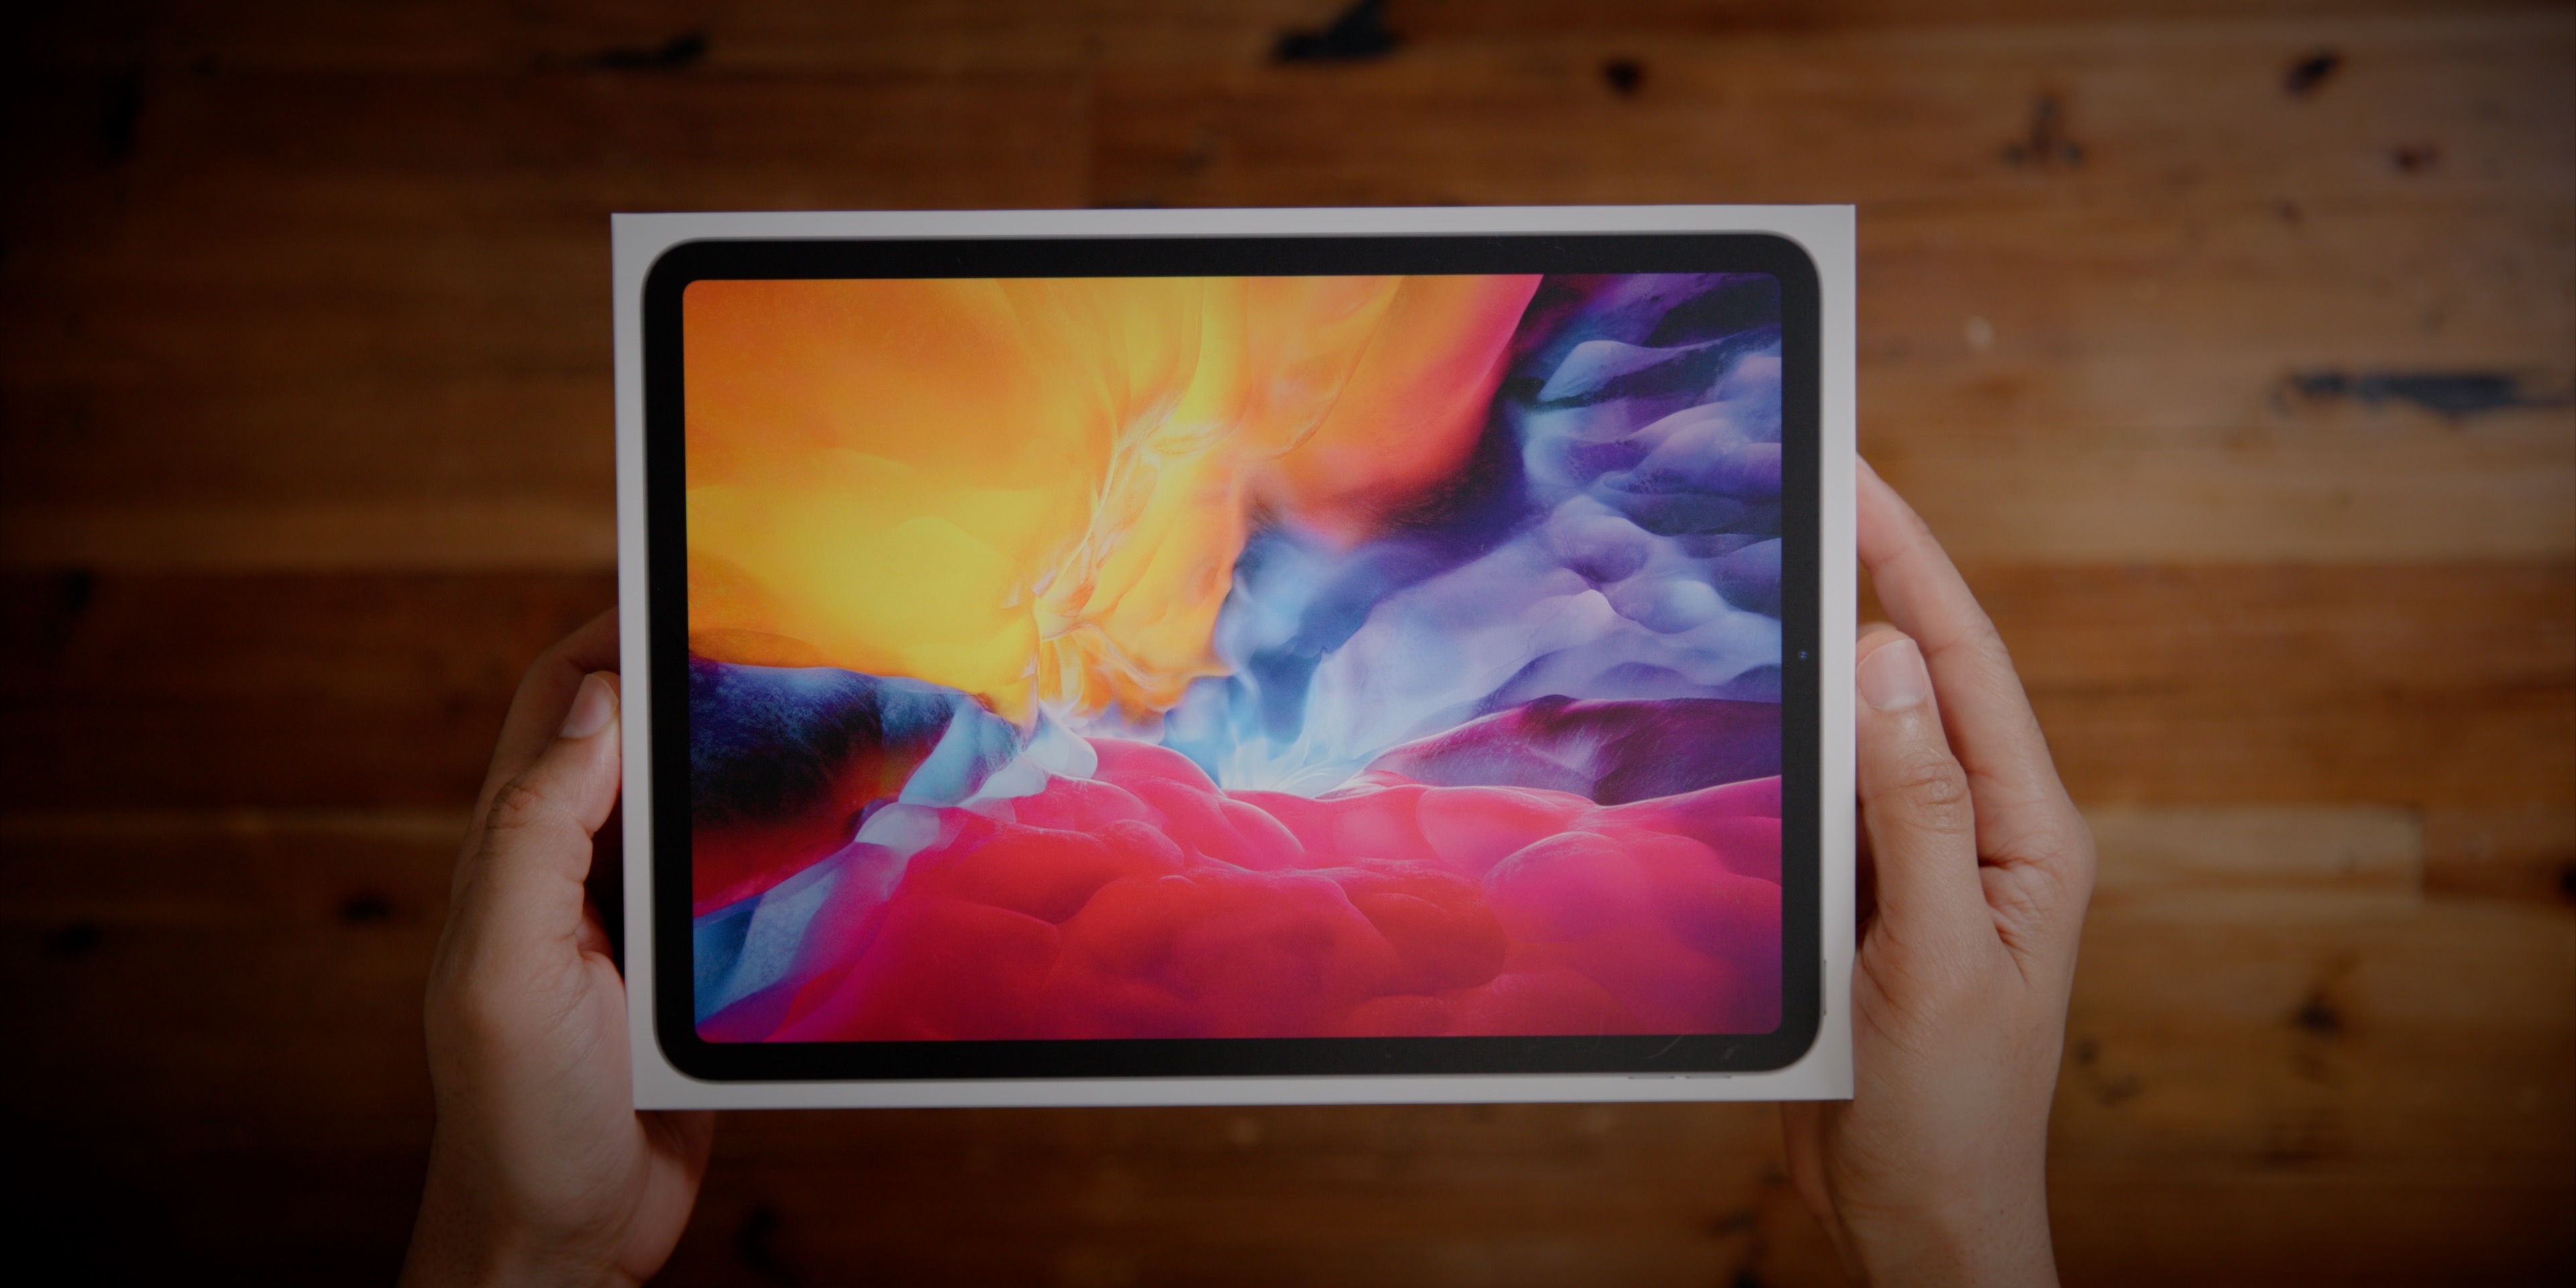 iPad Pro (2020) top features and impressions - 9to5Mac